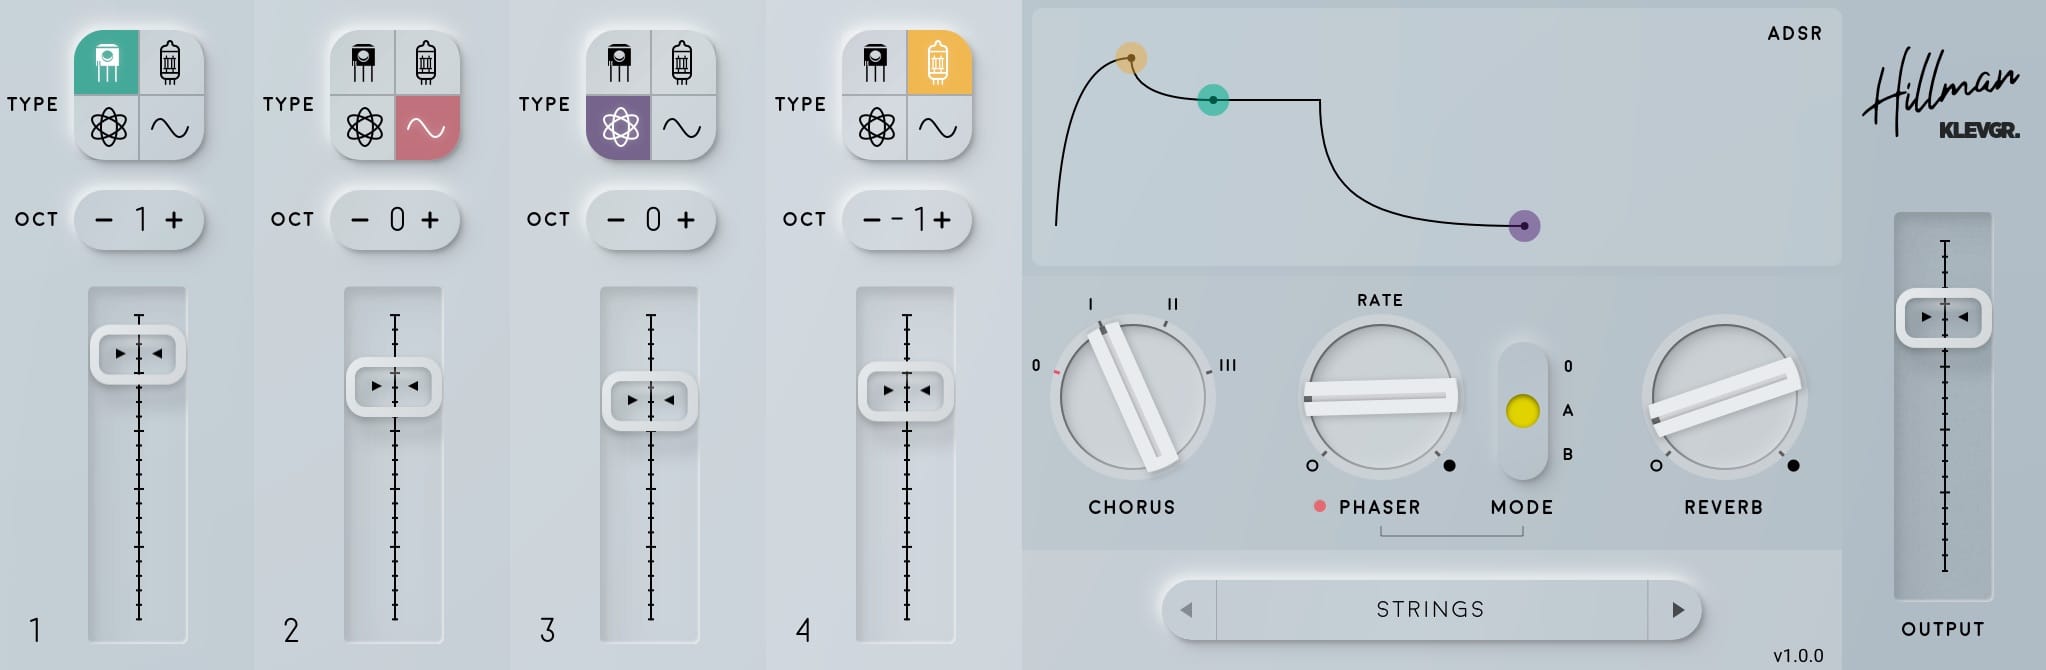 What a beauty! Klevgrand’s Hillman vintage synth app is a textbook example of neumorphism